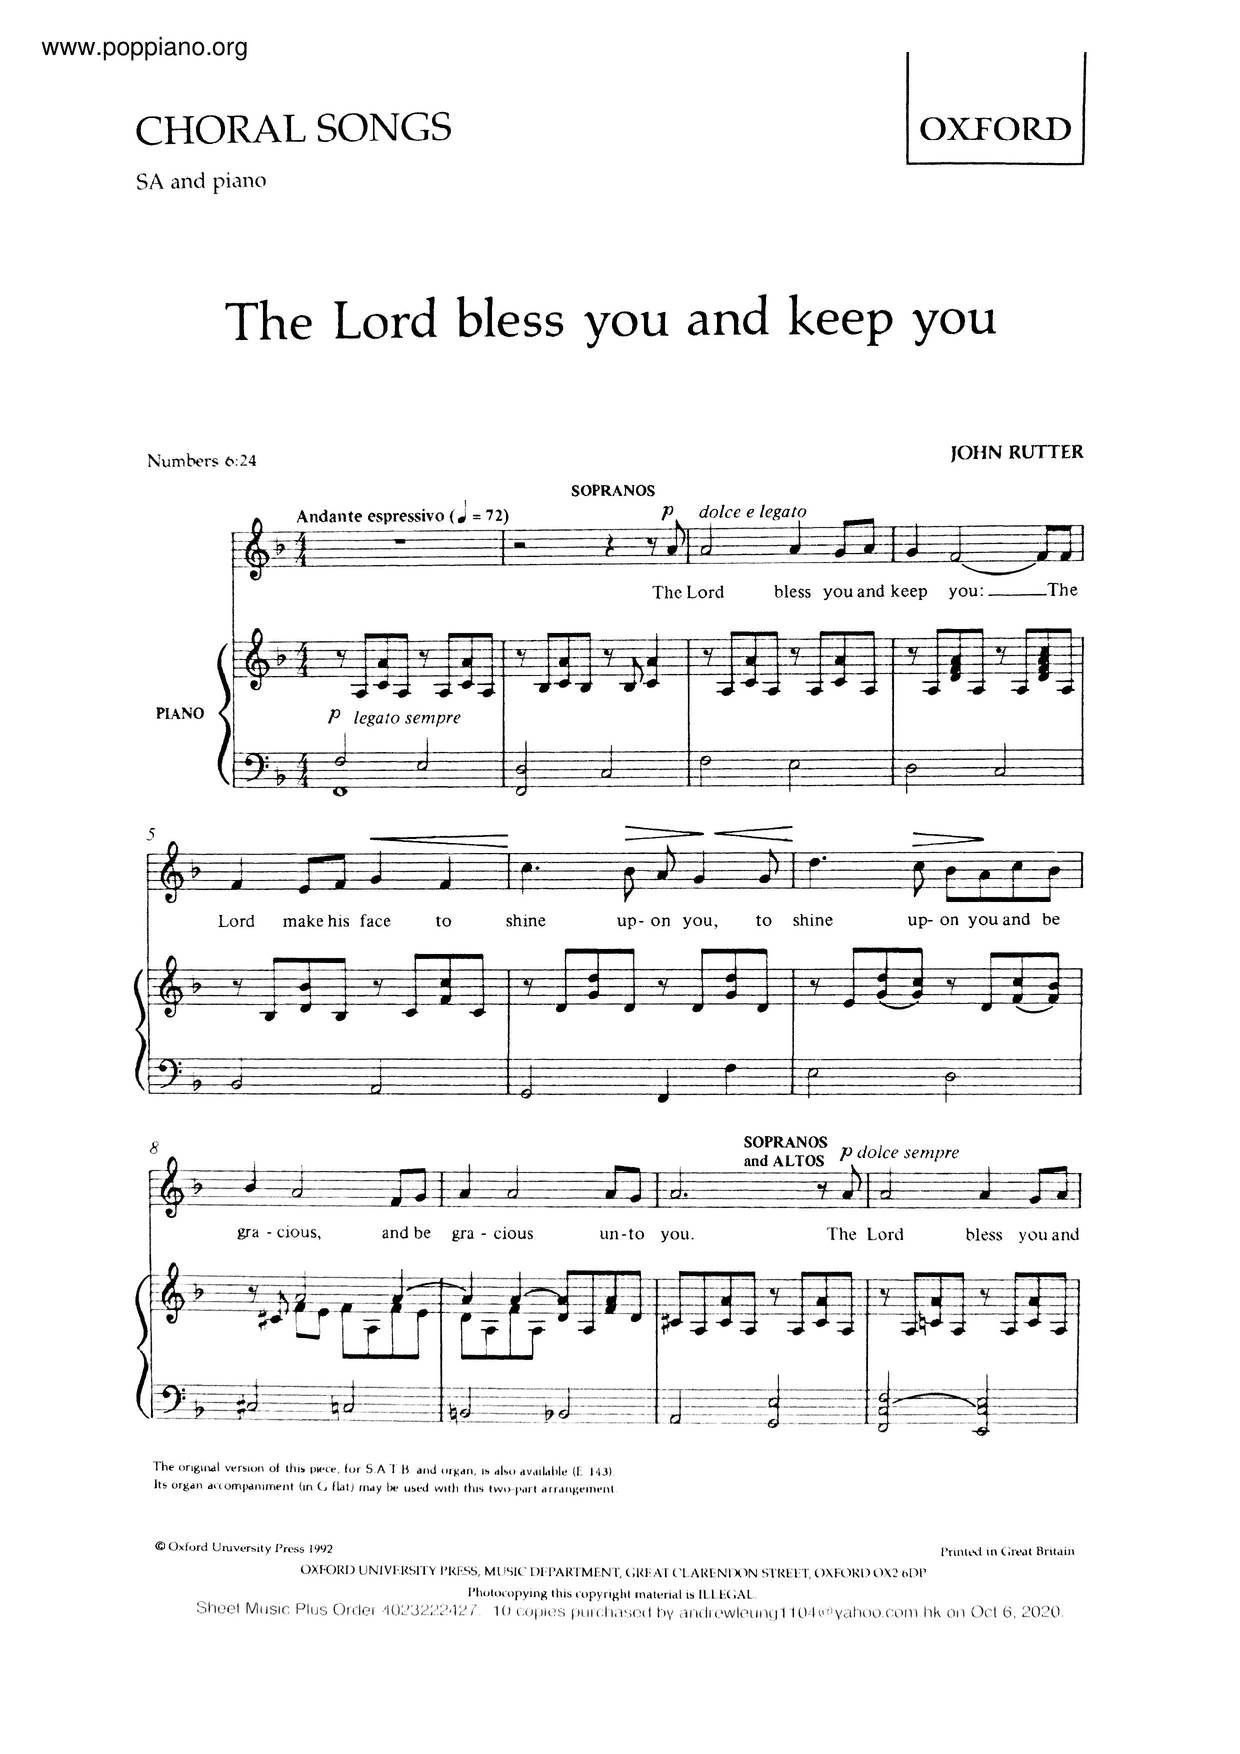 The Lord Bless You And Keep You Score